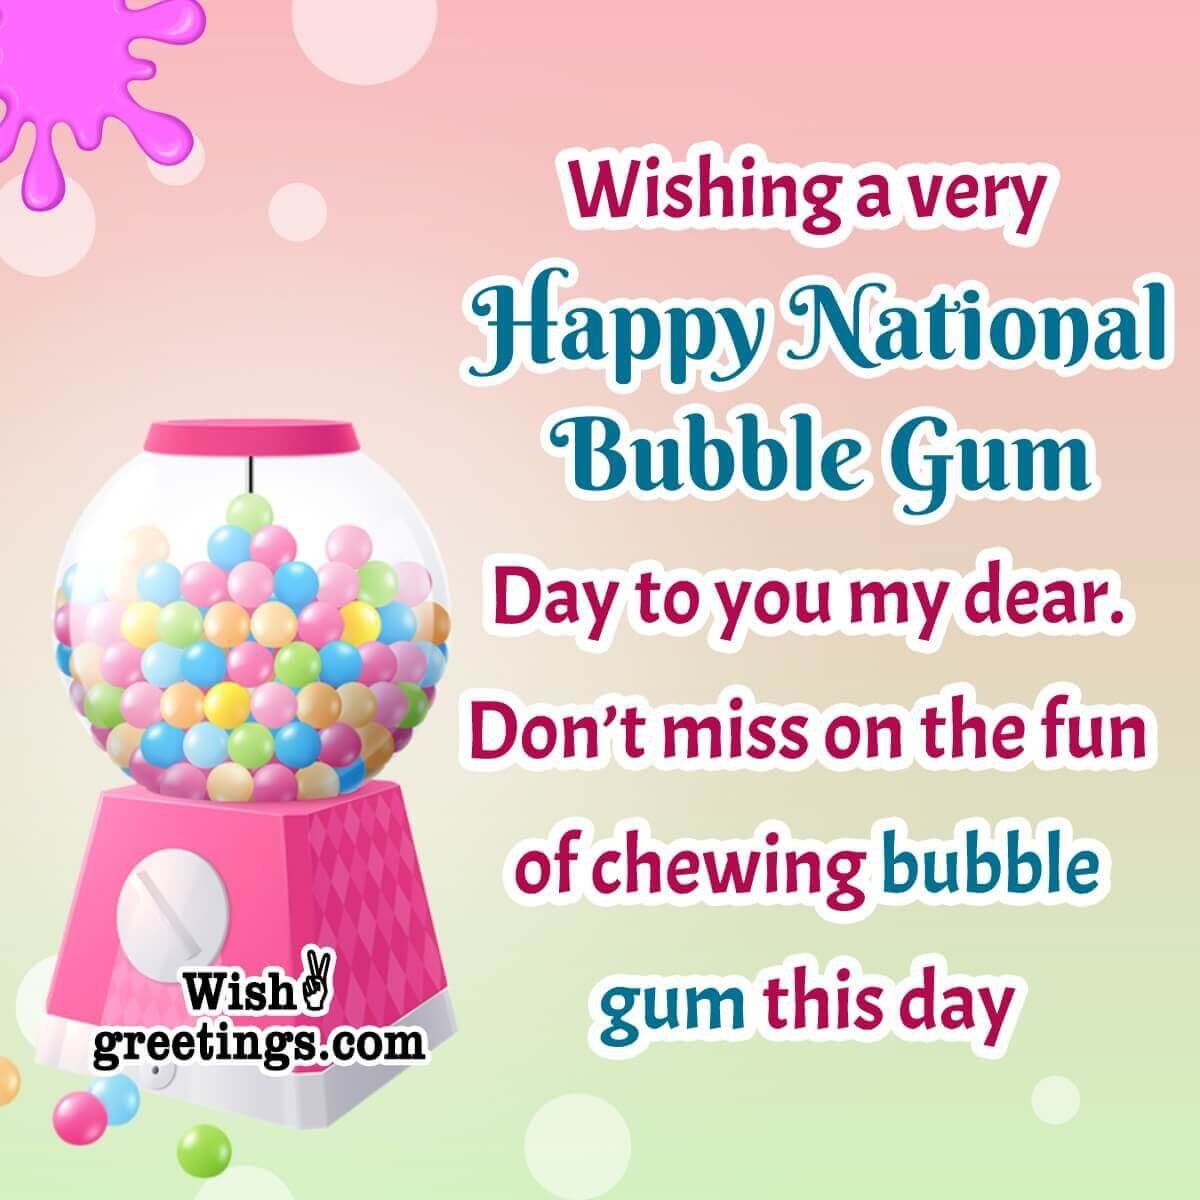 National Bubble Gum Day Wish Image